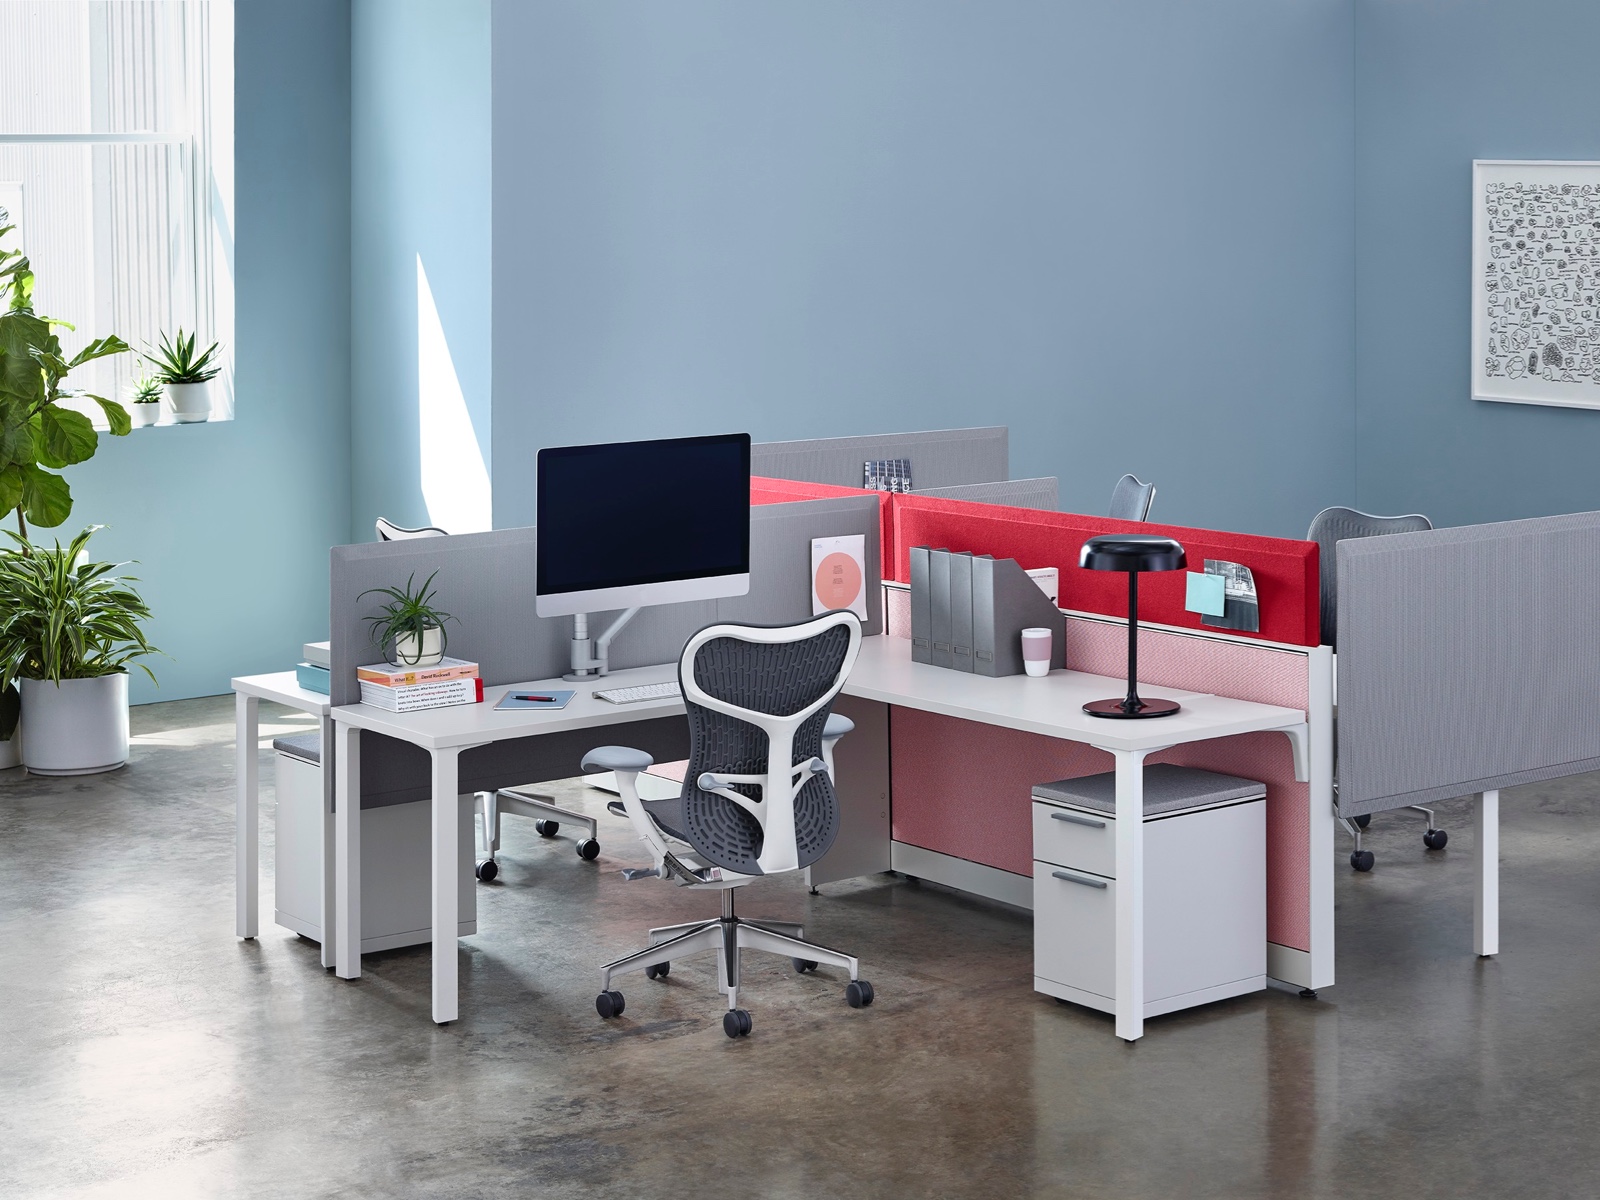 A cluster of four Canvas Wall workstations with white 90-degree surfaces, gray and red Pari Screens, and gray Mirra 2 office chairs.